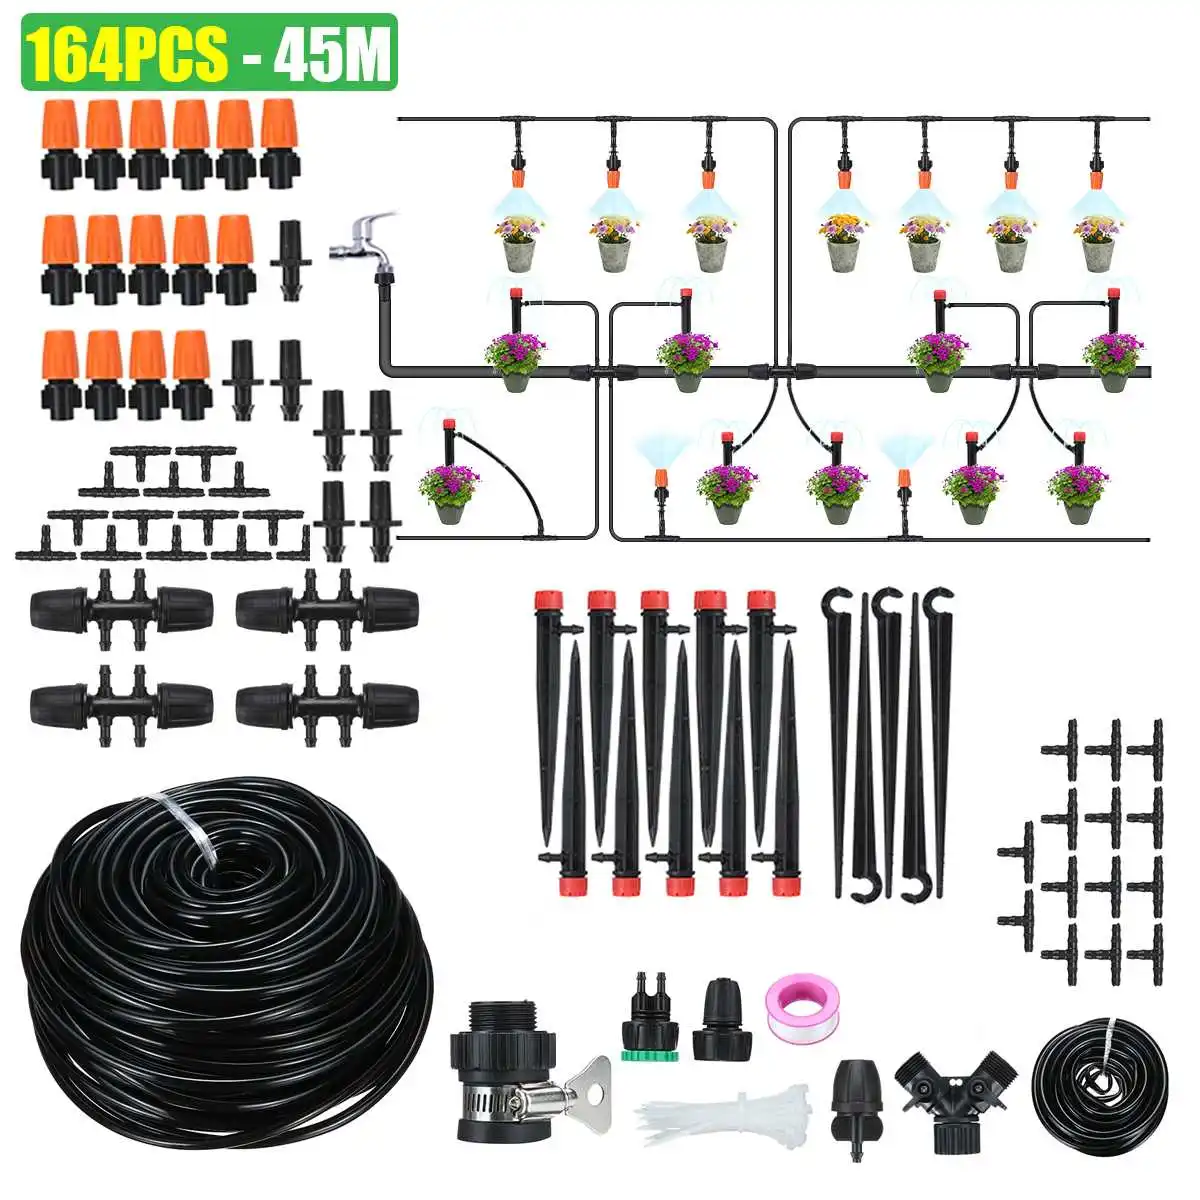 

164pcs 45m Hose Drip Irrigation System Plant Watering Set 360 Degree Adjustable Drippers Misting Cooling For Garden Greenhouse